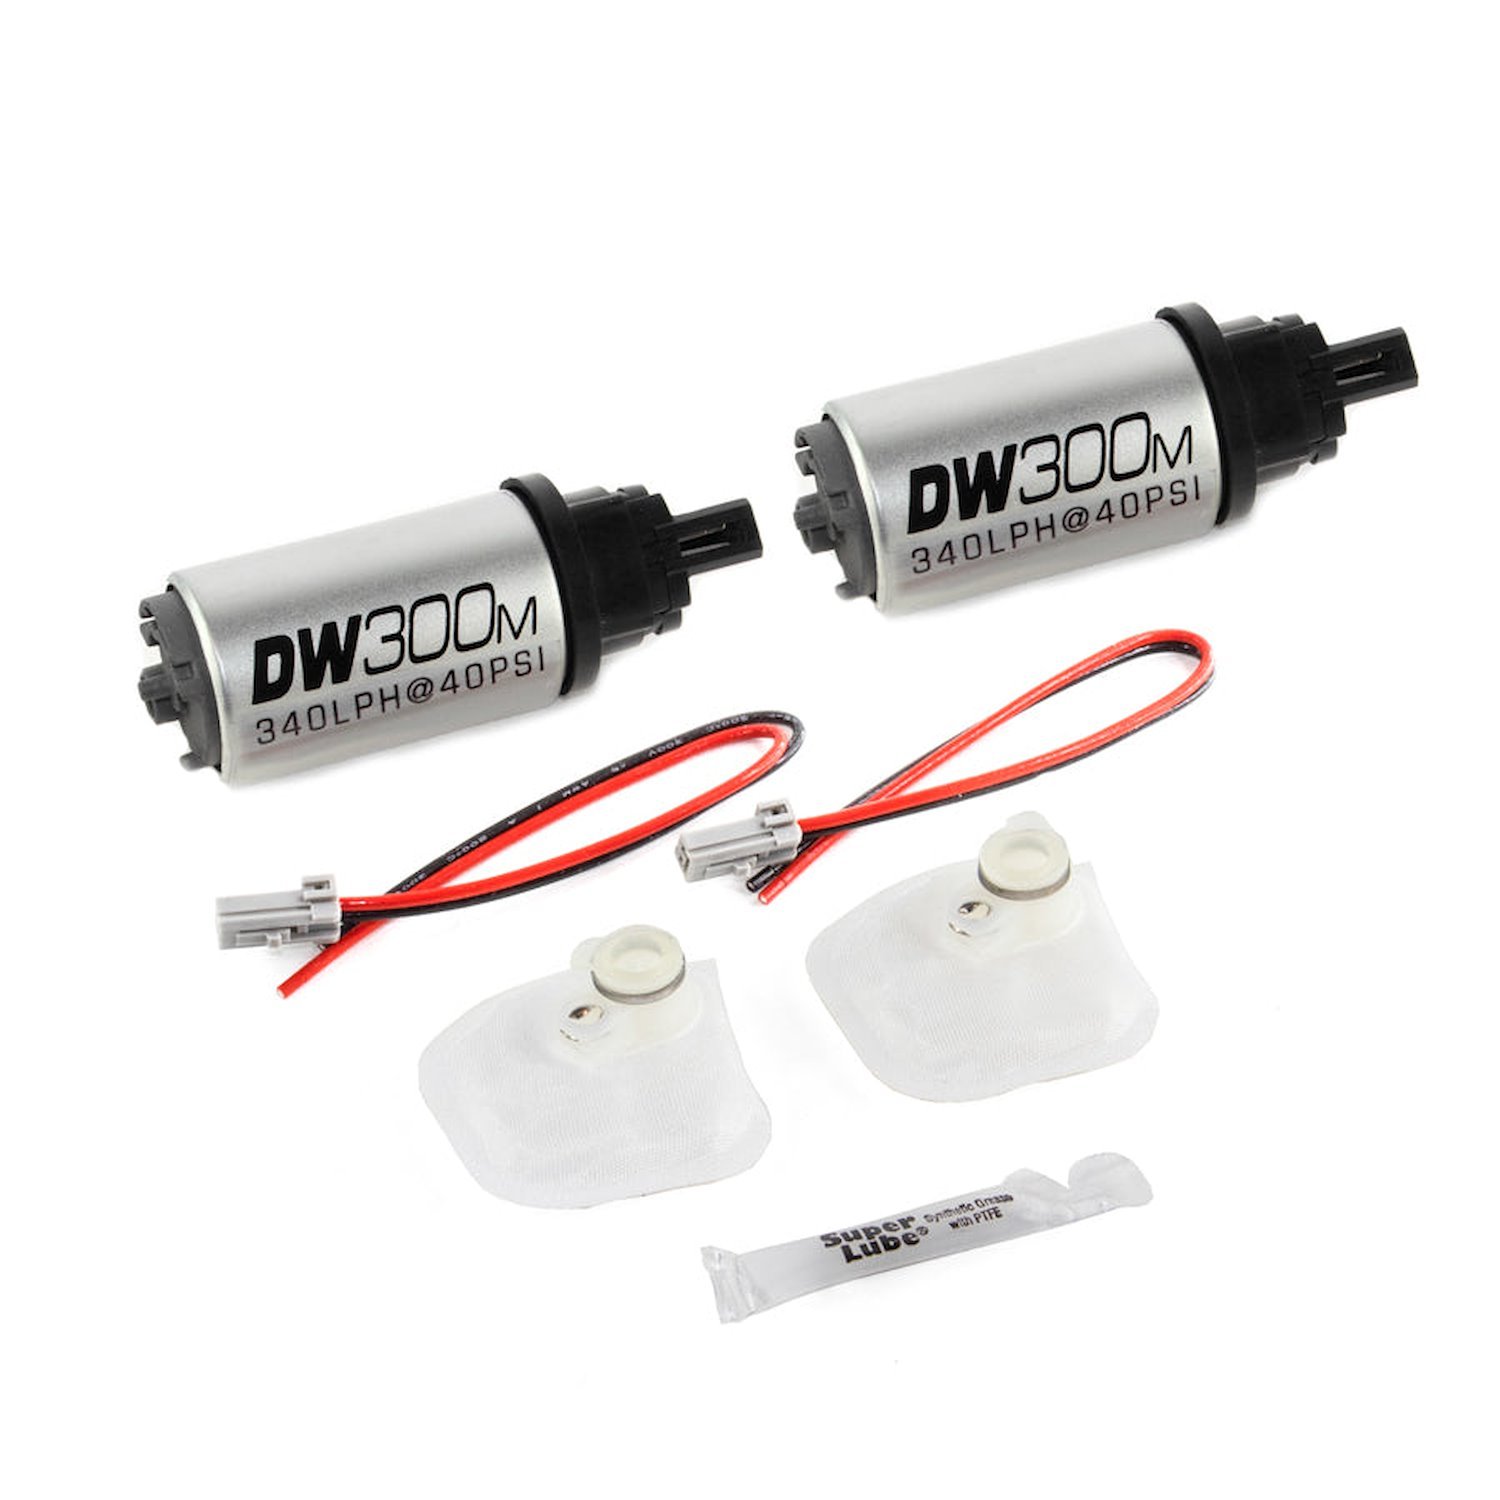 93051035 DW300M series 340lph Ford in-tank fuel pump w/ install kit for 07-10 GT500 and GT500KR (2 pumps included)